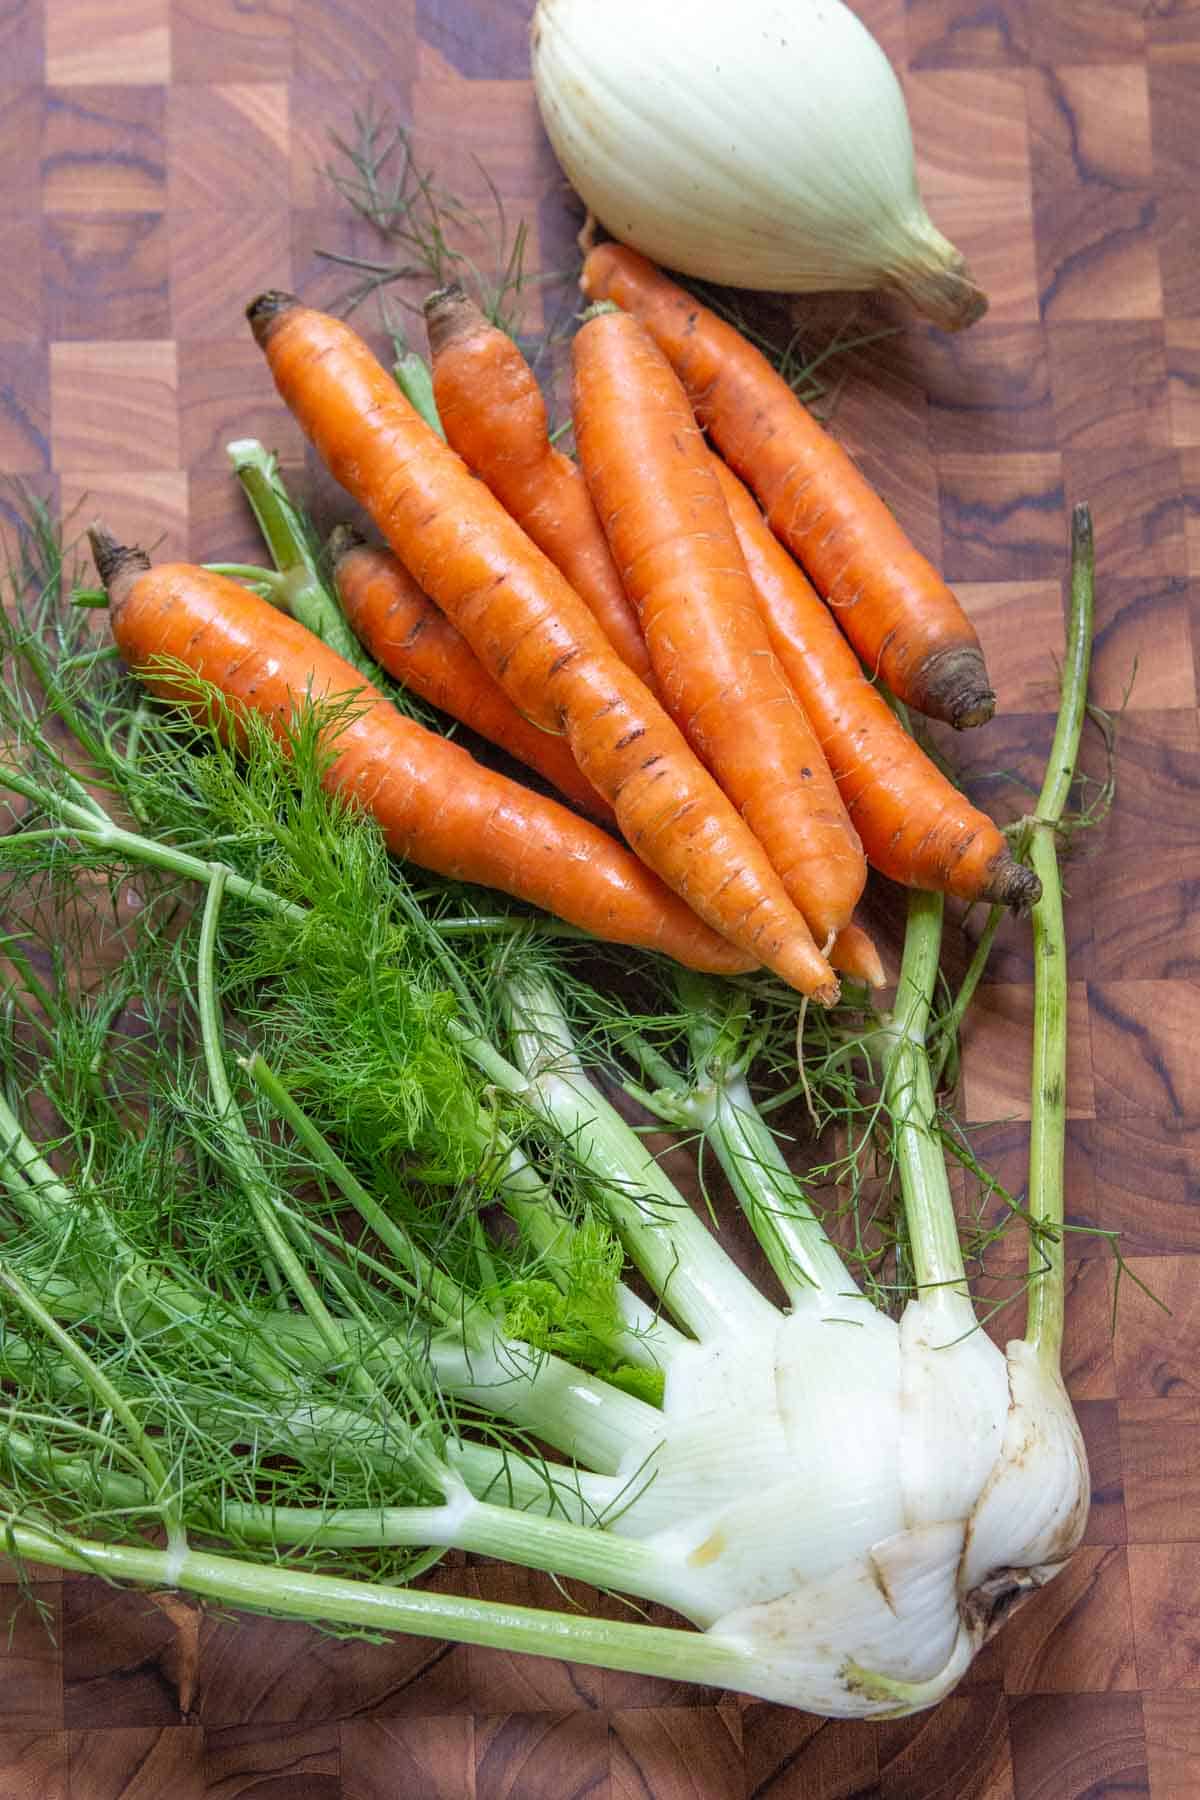 fennel, carrots, and onion on cutting board